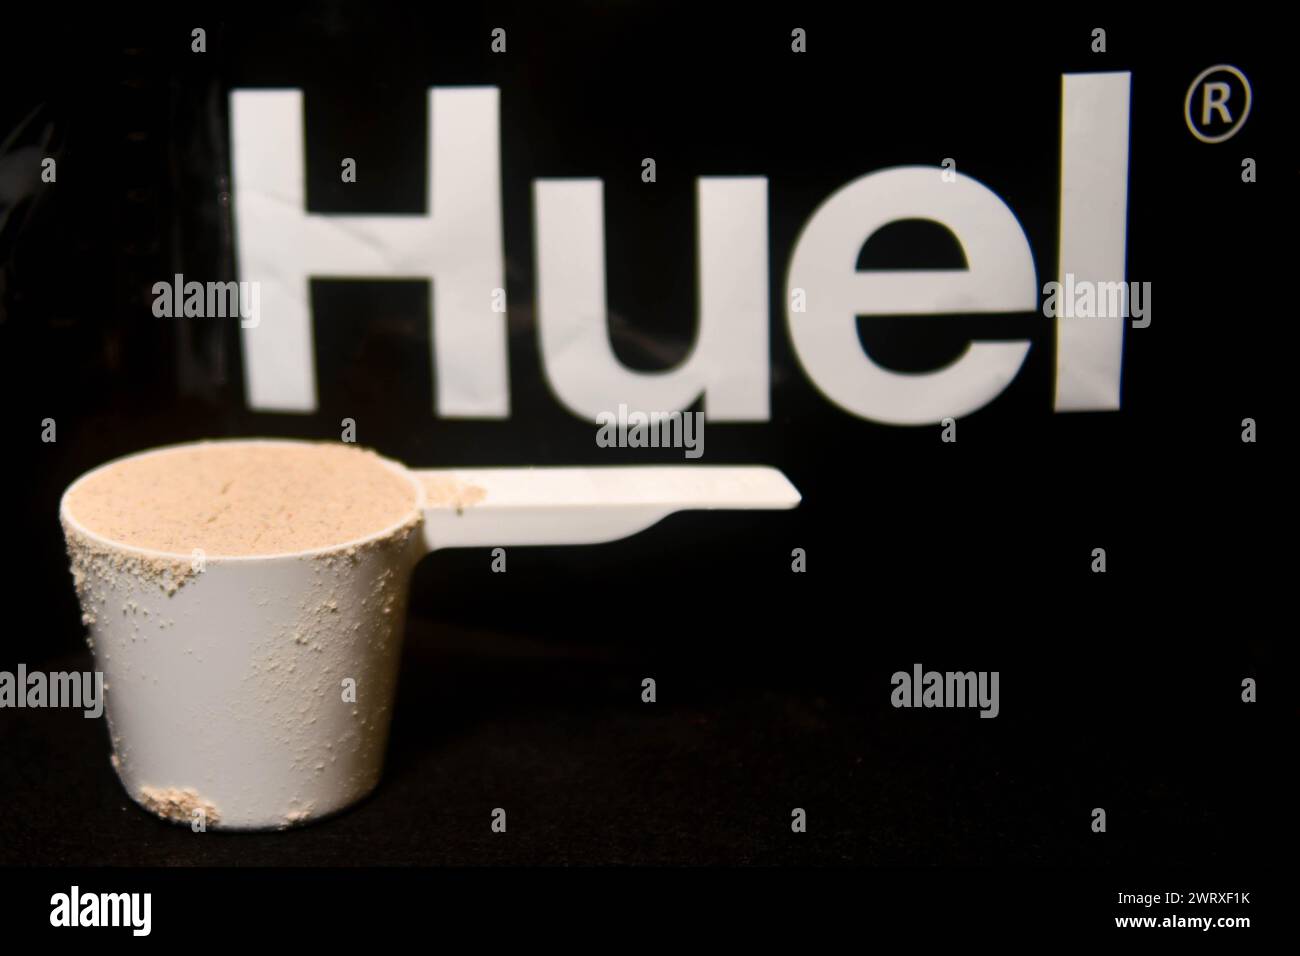 Huel meal replacement Stock Photo